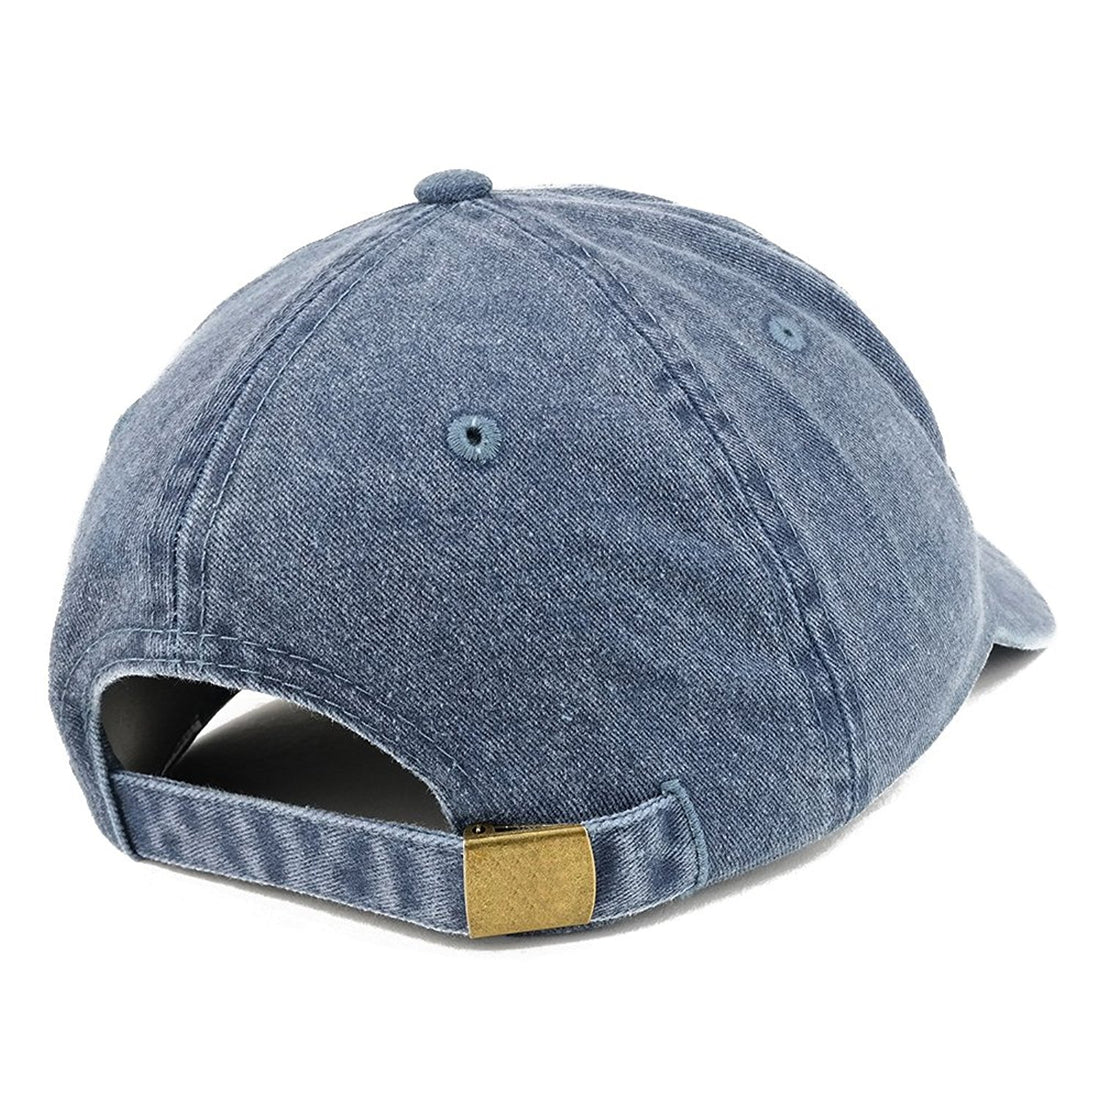 Trendy Apparel Shop Established 1962 Embroidered 57th Birthday Gift Pigment Dyed Washed Cotton Cap